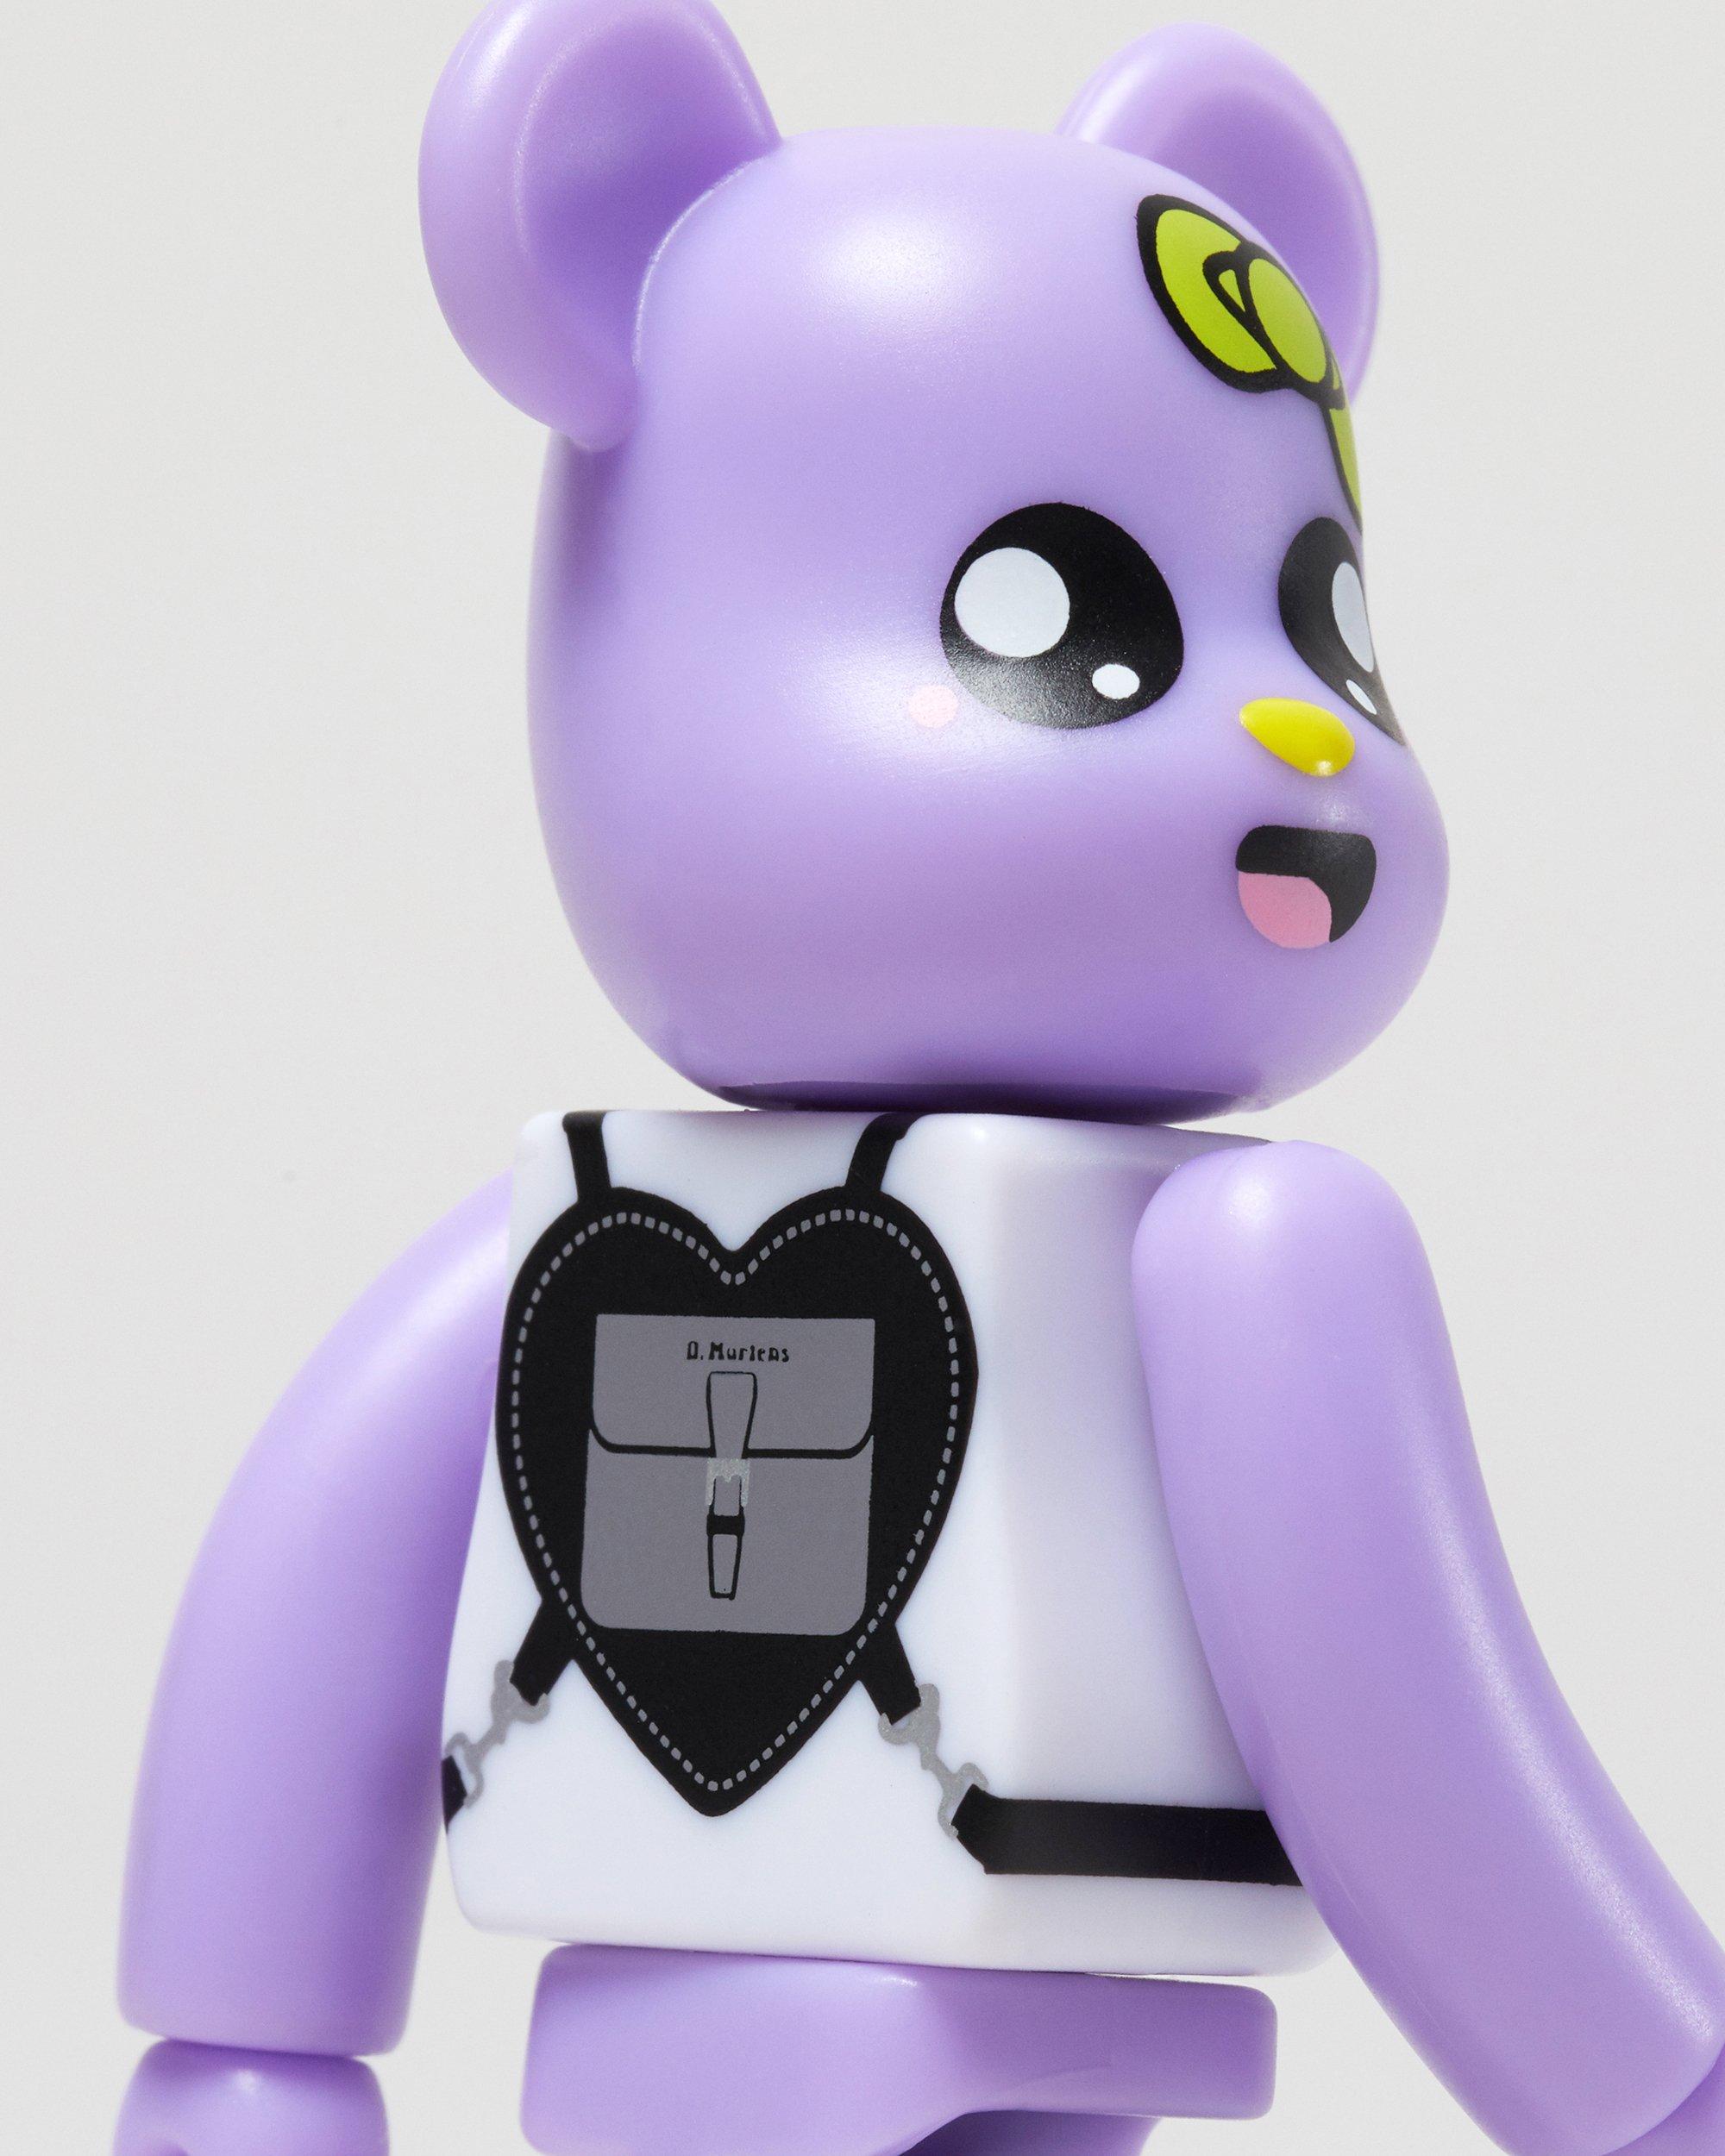 FIGURINE BE@RBRICK 00'SFIGURINES BE@RBRICK À COLLECTIONNER Dr. Martens